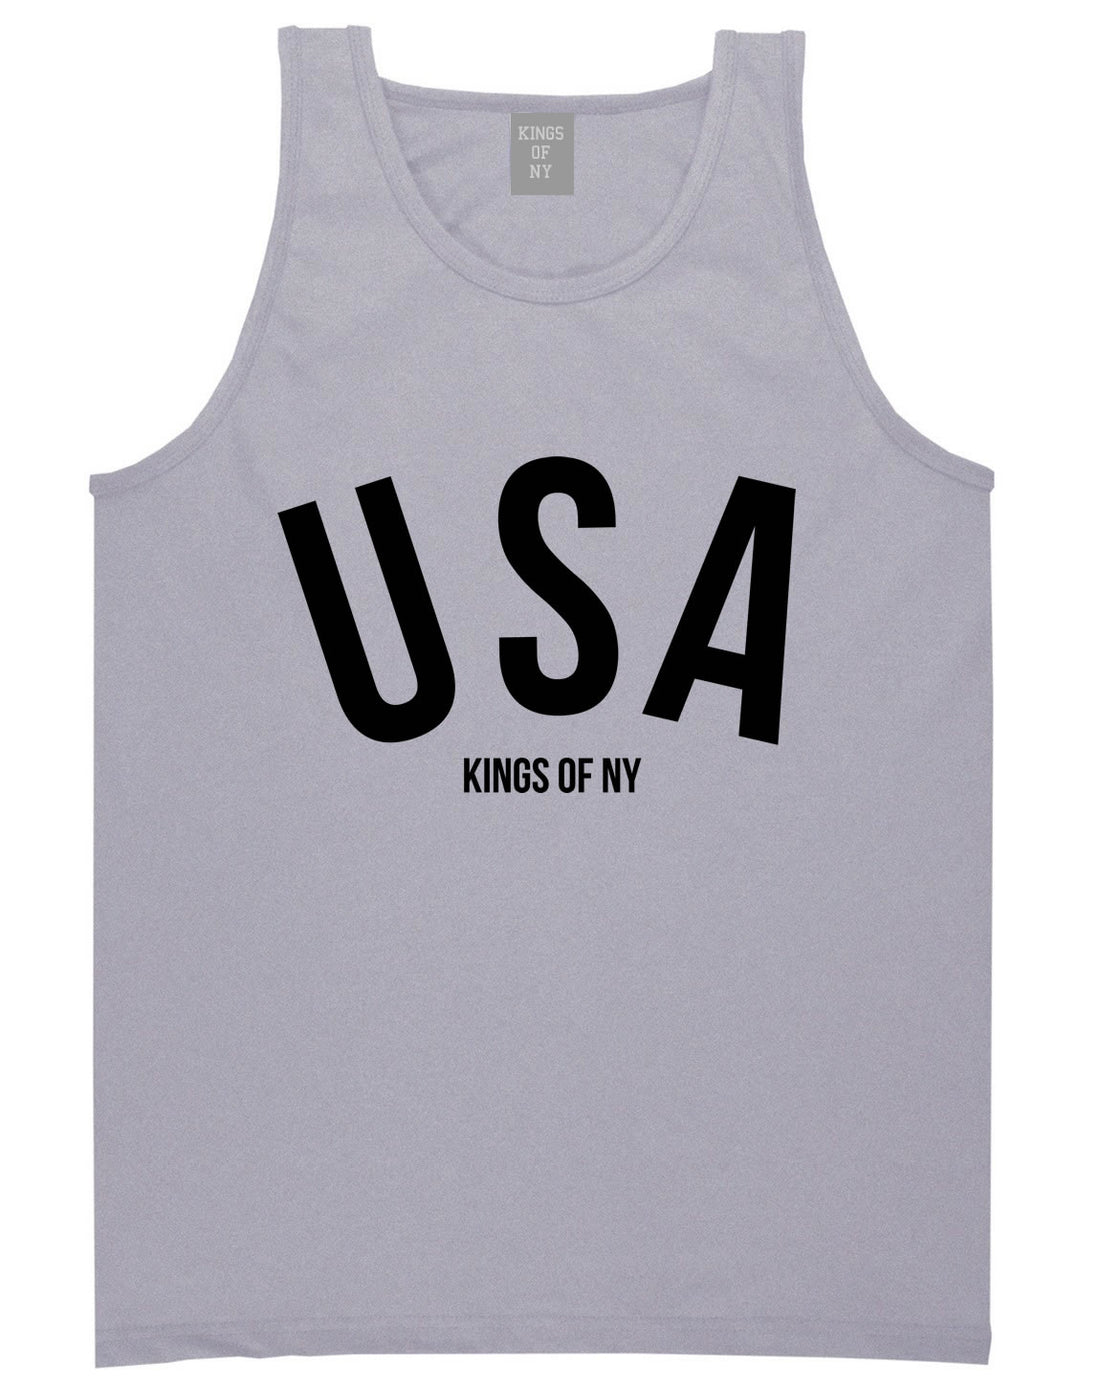 USA Tank Top in Grey by Kings Of NY